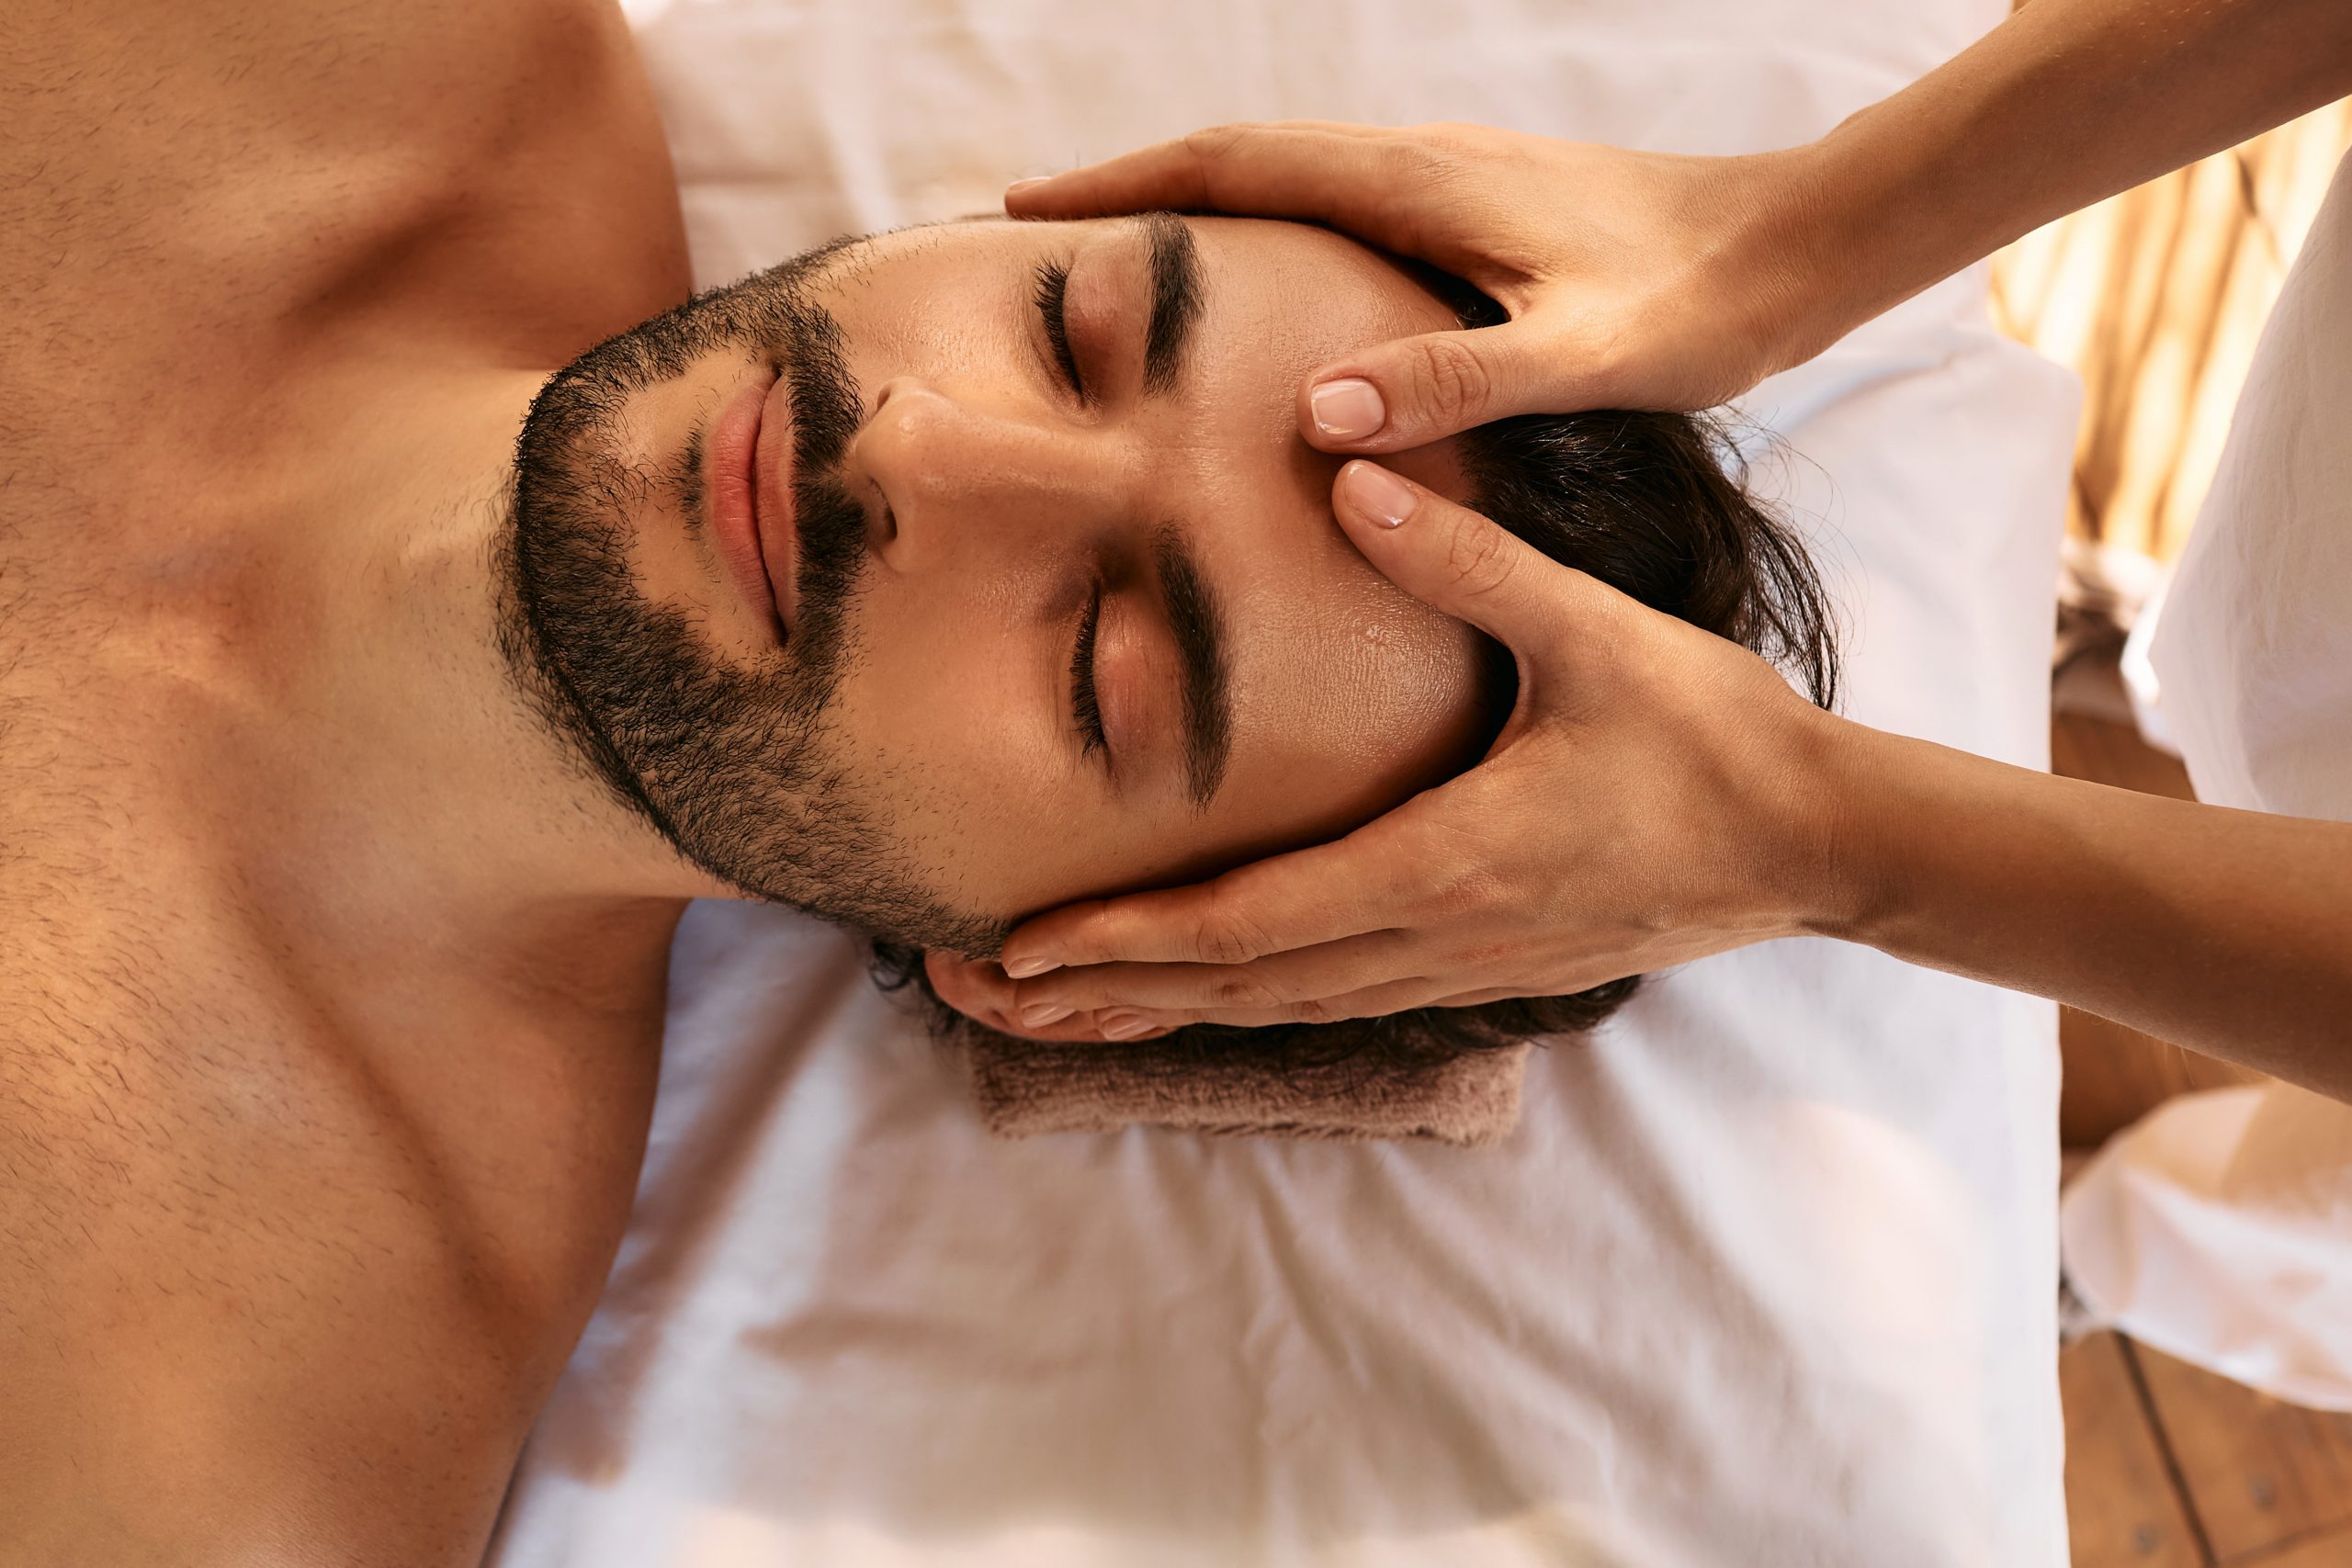 Relaxing anti-stress head massage. Handsome man relaxes in a massage parlor during head massage, top view